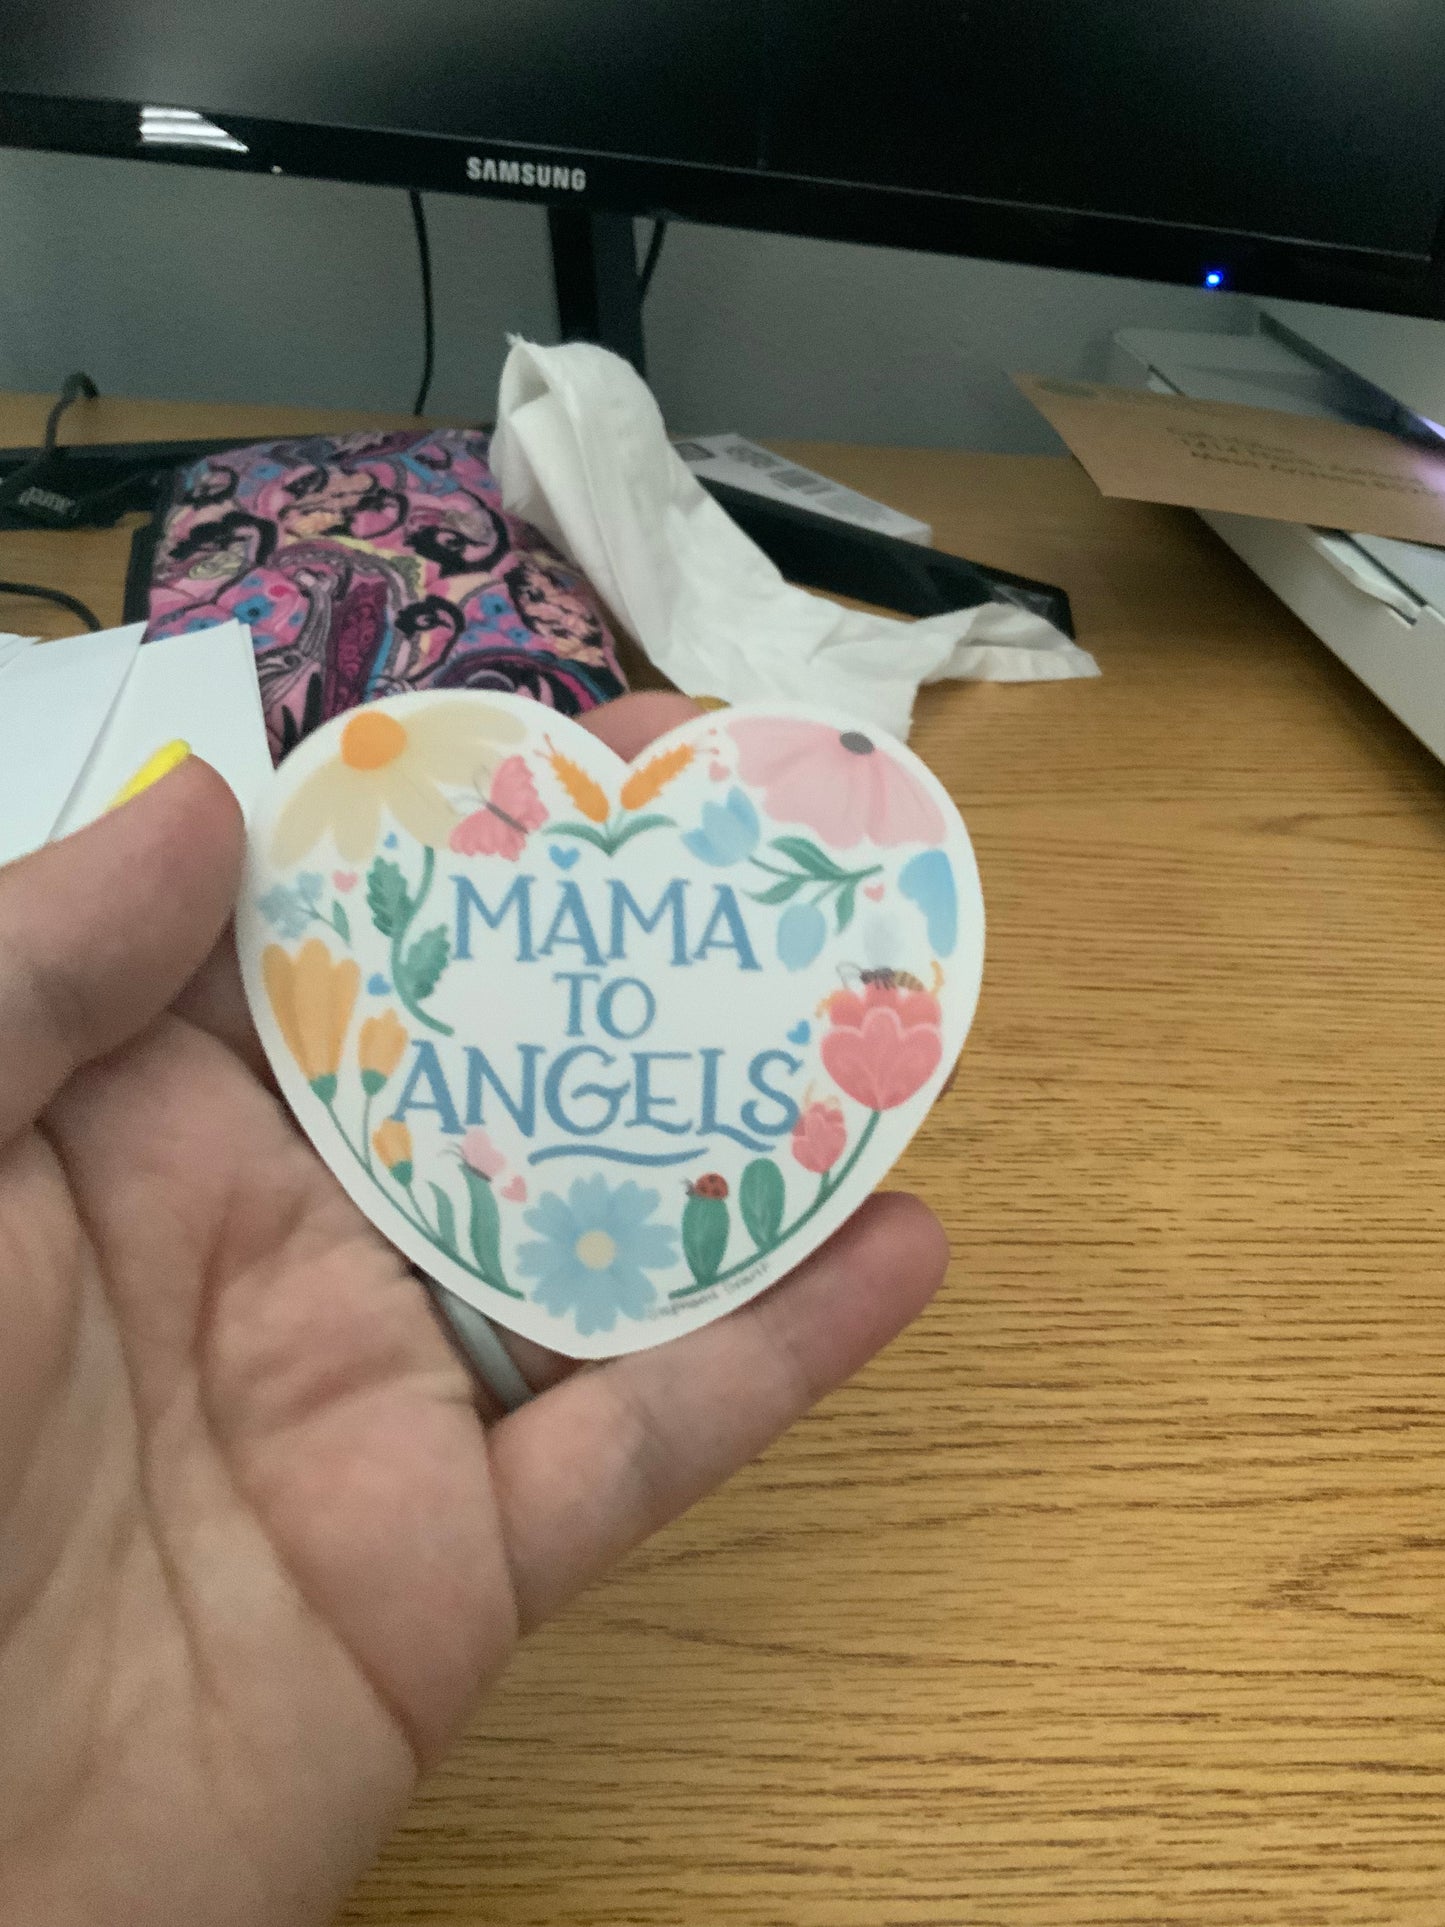 “Mama to an Angel” floral heart weatherproof sticker